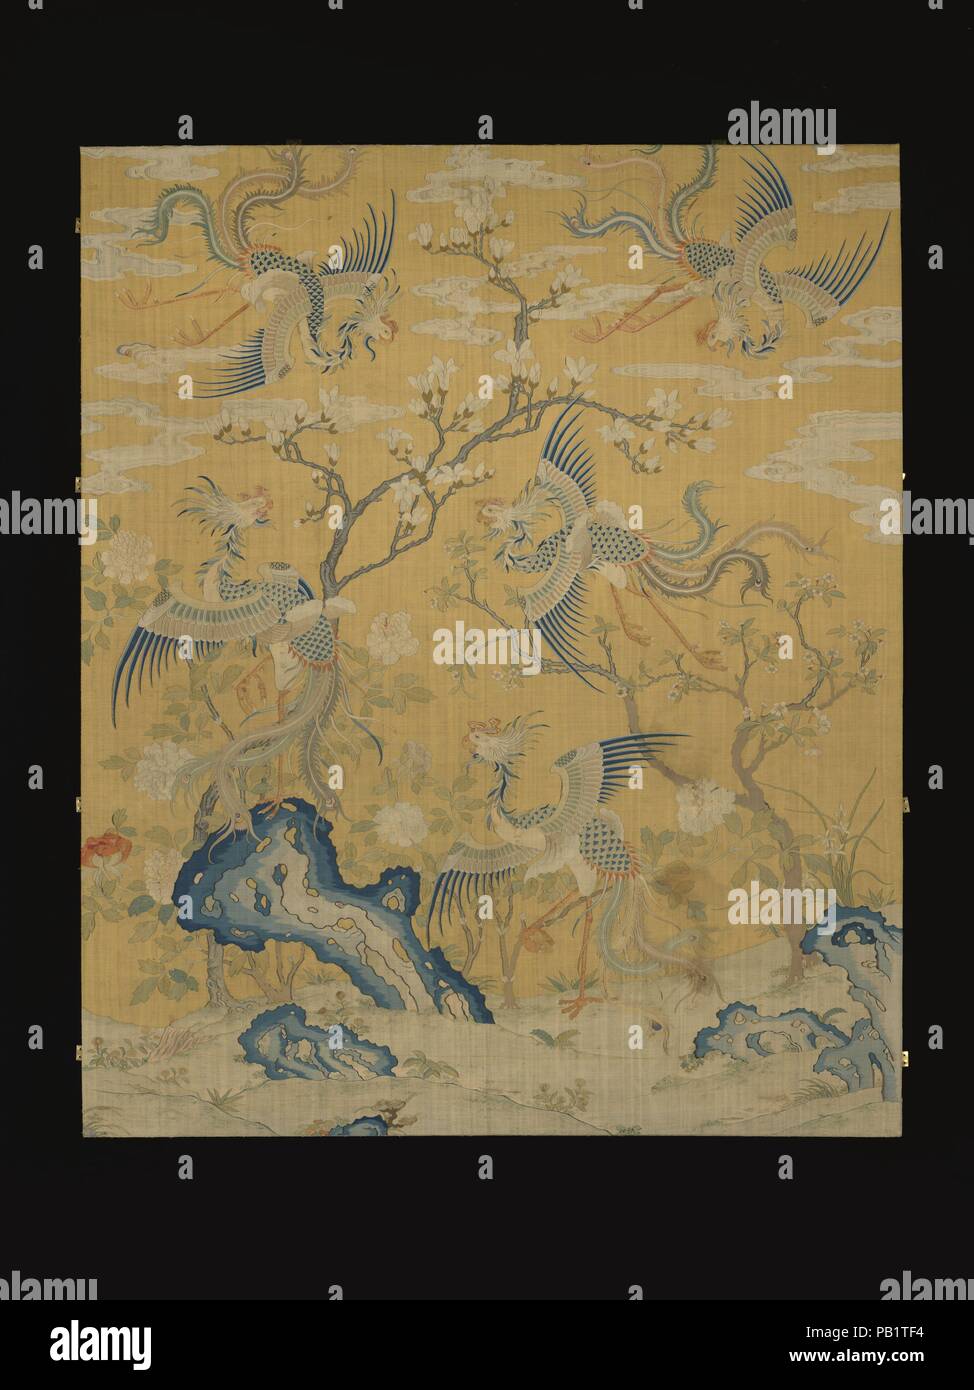 Panel with five phoenixes in a garden. Culture: China. Dimensions: 118 1/2 × 82 in. (301 × 208.3 cm). Date: 18th century.  Large pictorial silk tapestries such as this one were mostly woven in the imperial workshops in Suzhou, a textile center in southeast China. The bright yellow background, a color exclusive to the emperor, further confirms its imperial origins. The five phoenixes probably refer to the five species of this auspicious bird in Chinese myths. This piece is paired with another five-phoenix panel in The Met collection, and the set could represent the five ideal relationships (wul Stock Photo